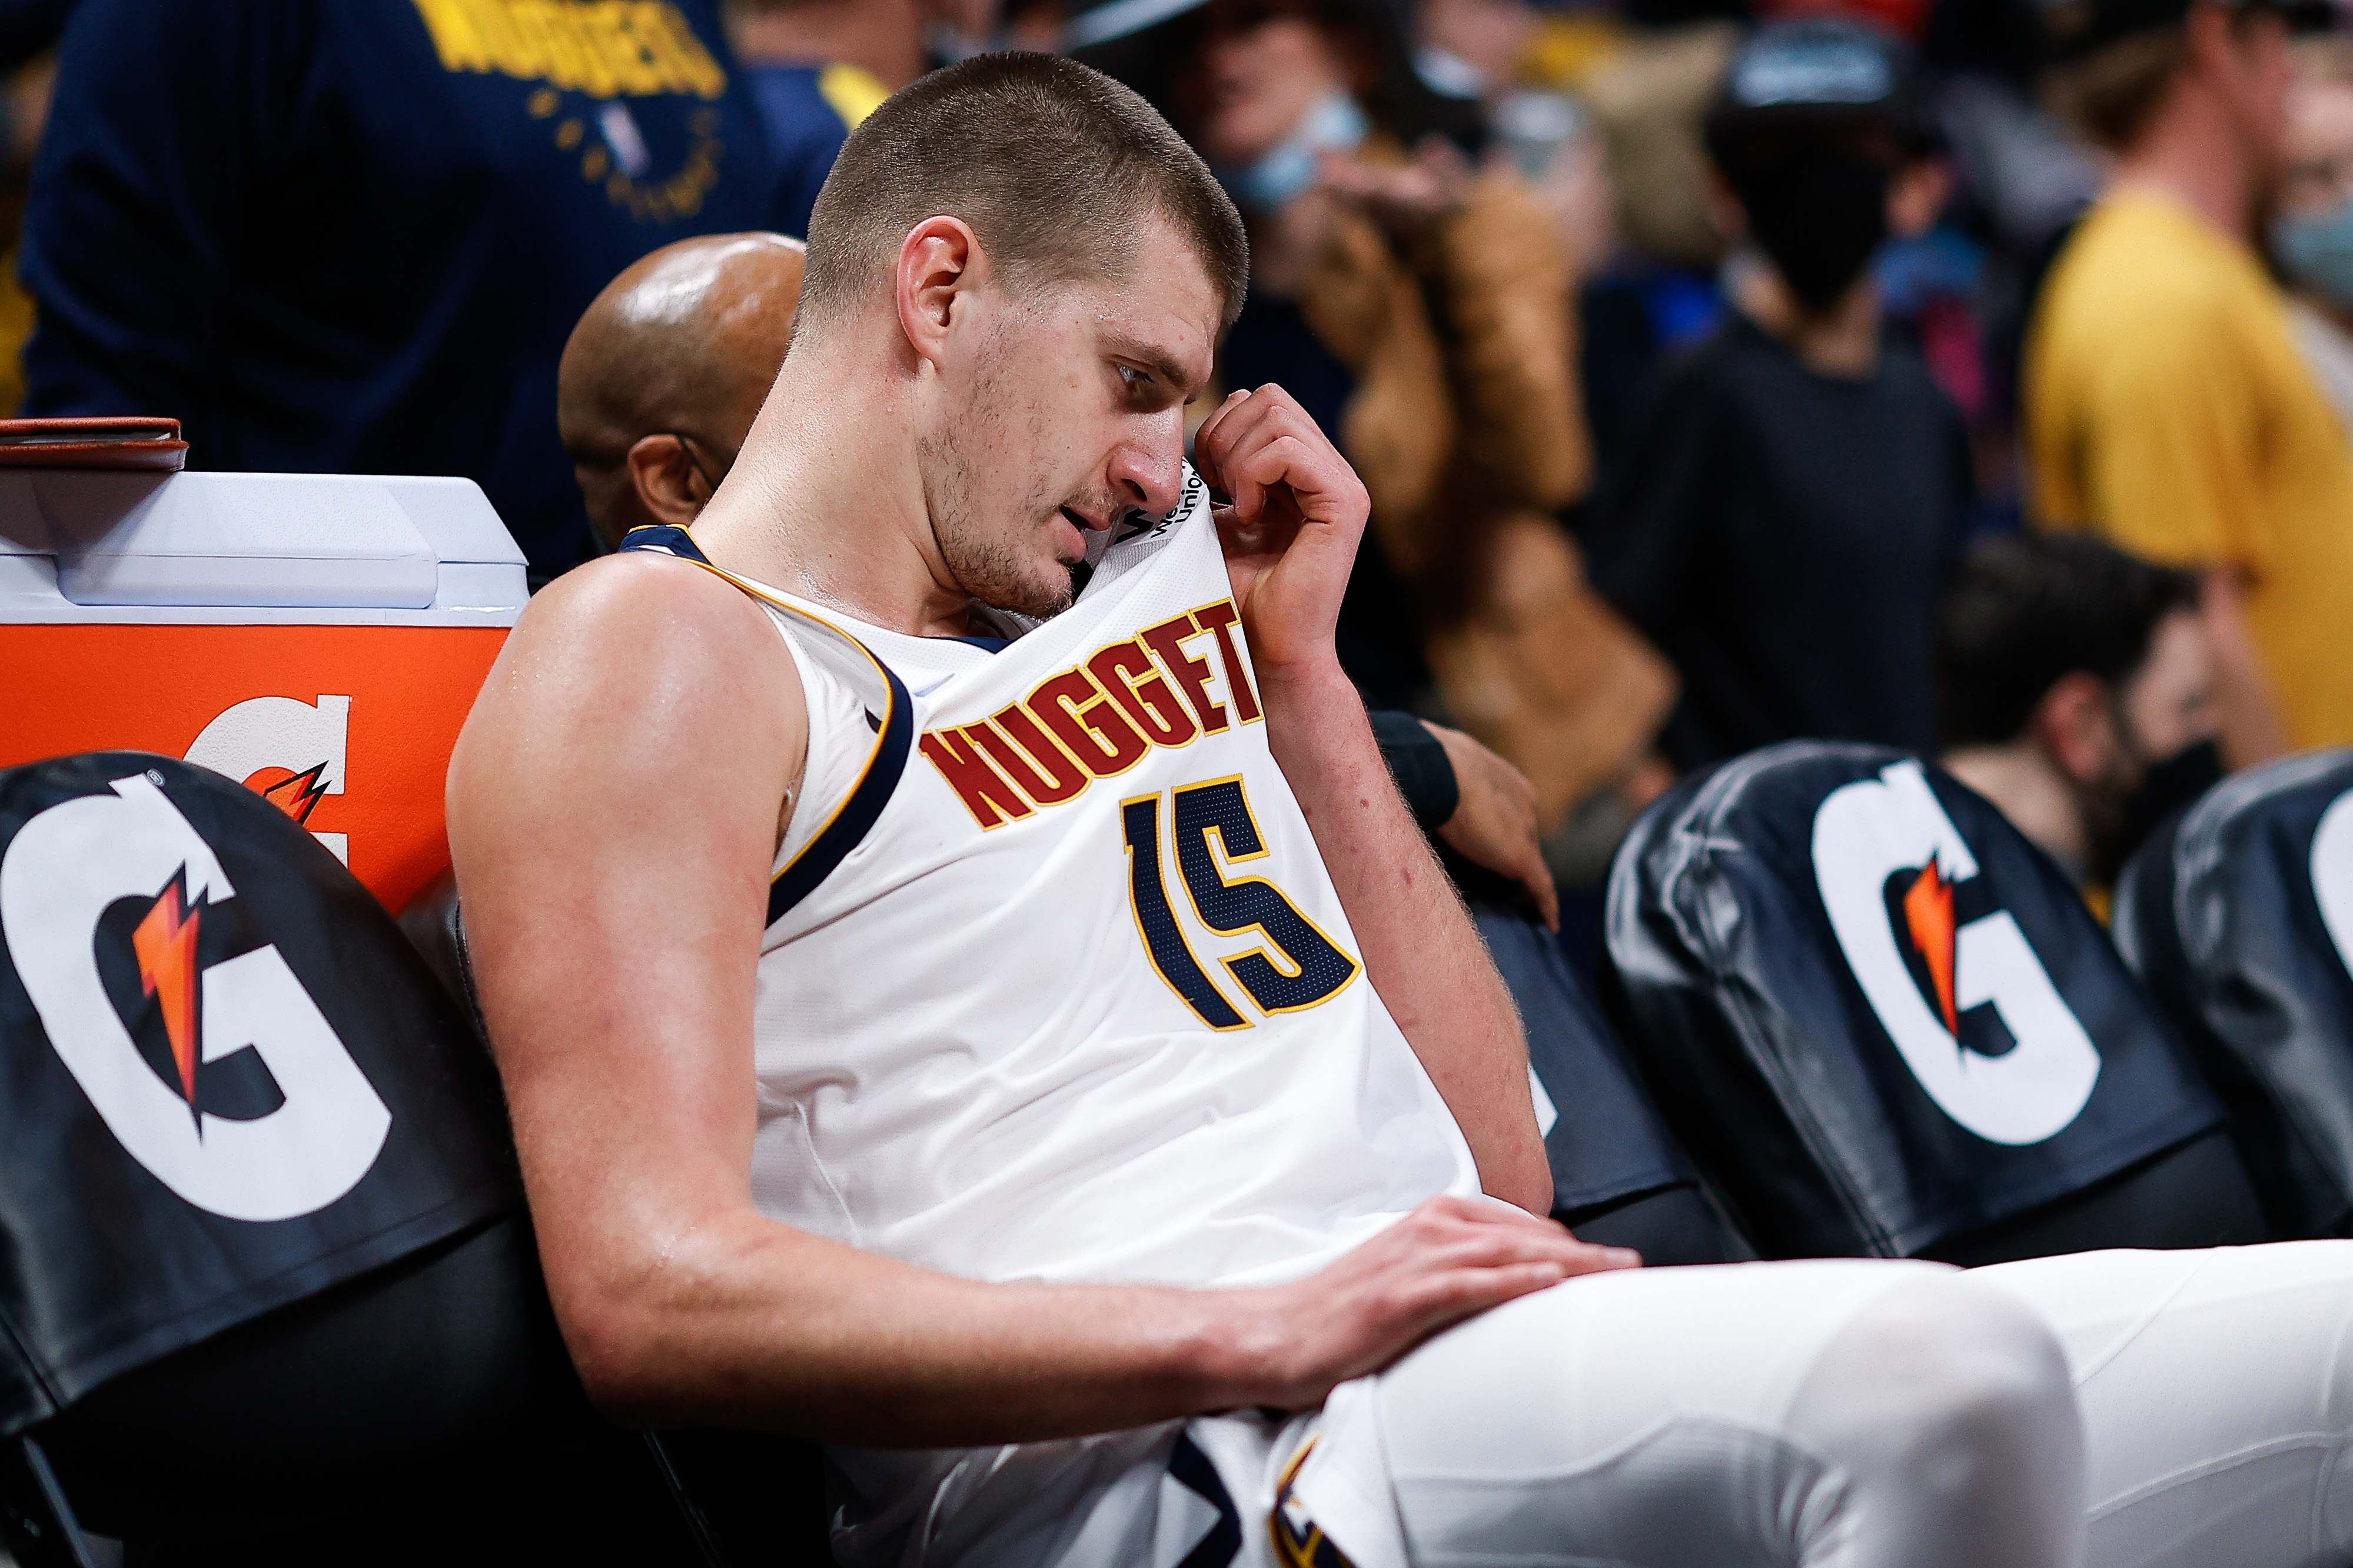 Nikola Jokic sits on the Nuggets bench during their game against the Heat.